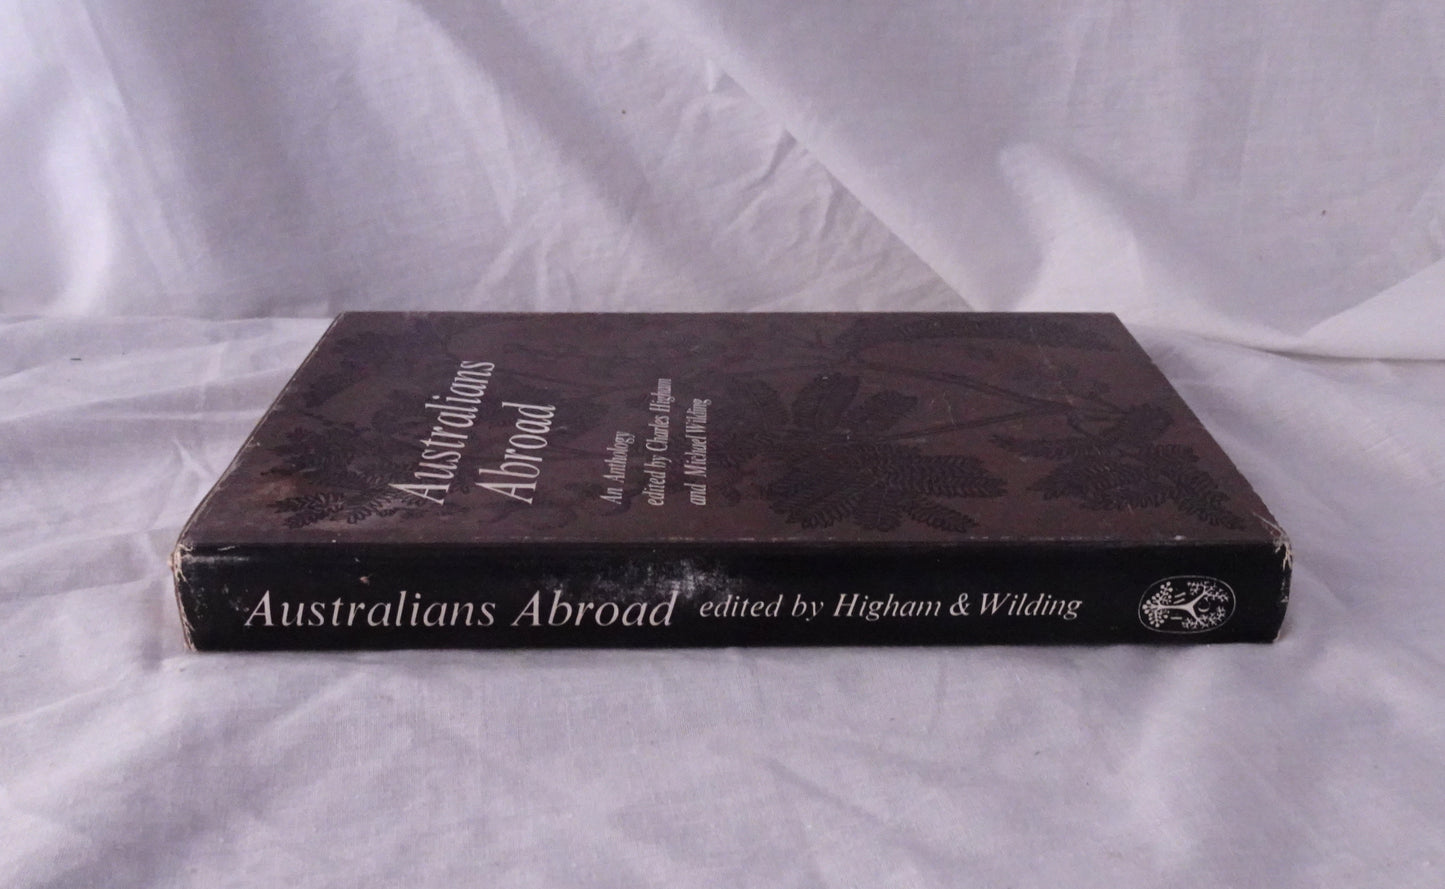 Australians Abroad by Charles Higham and Michael Wilding